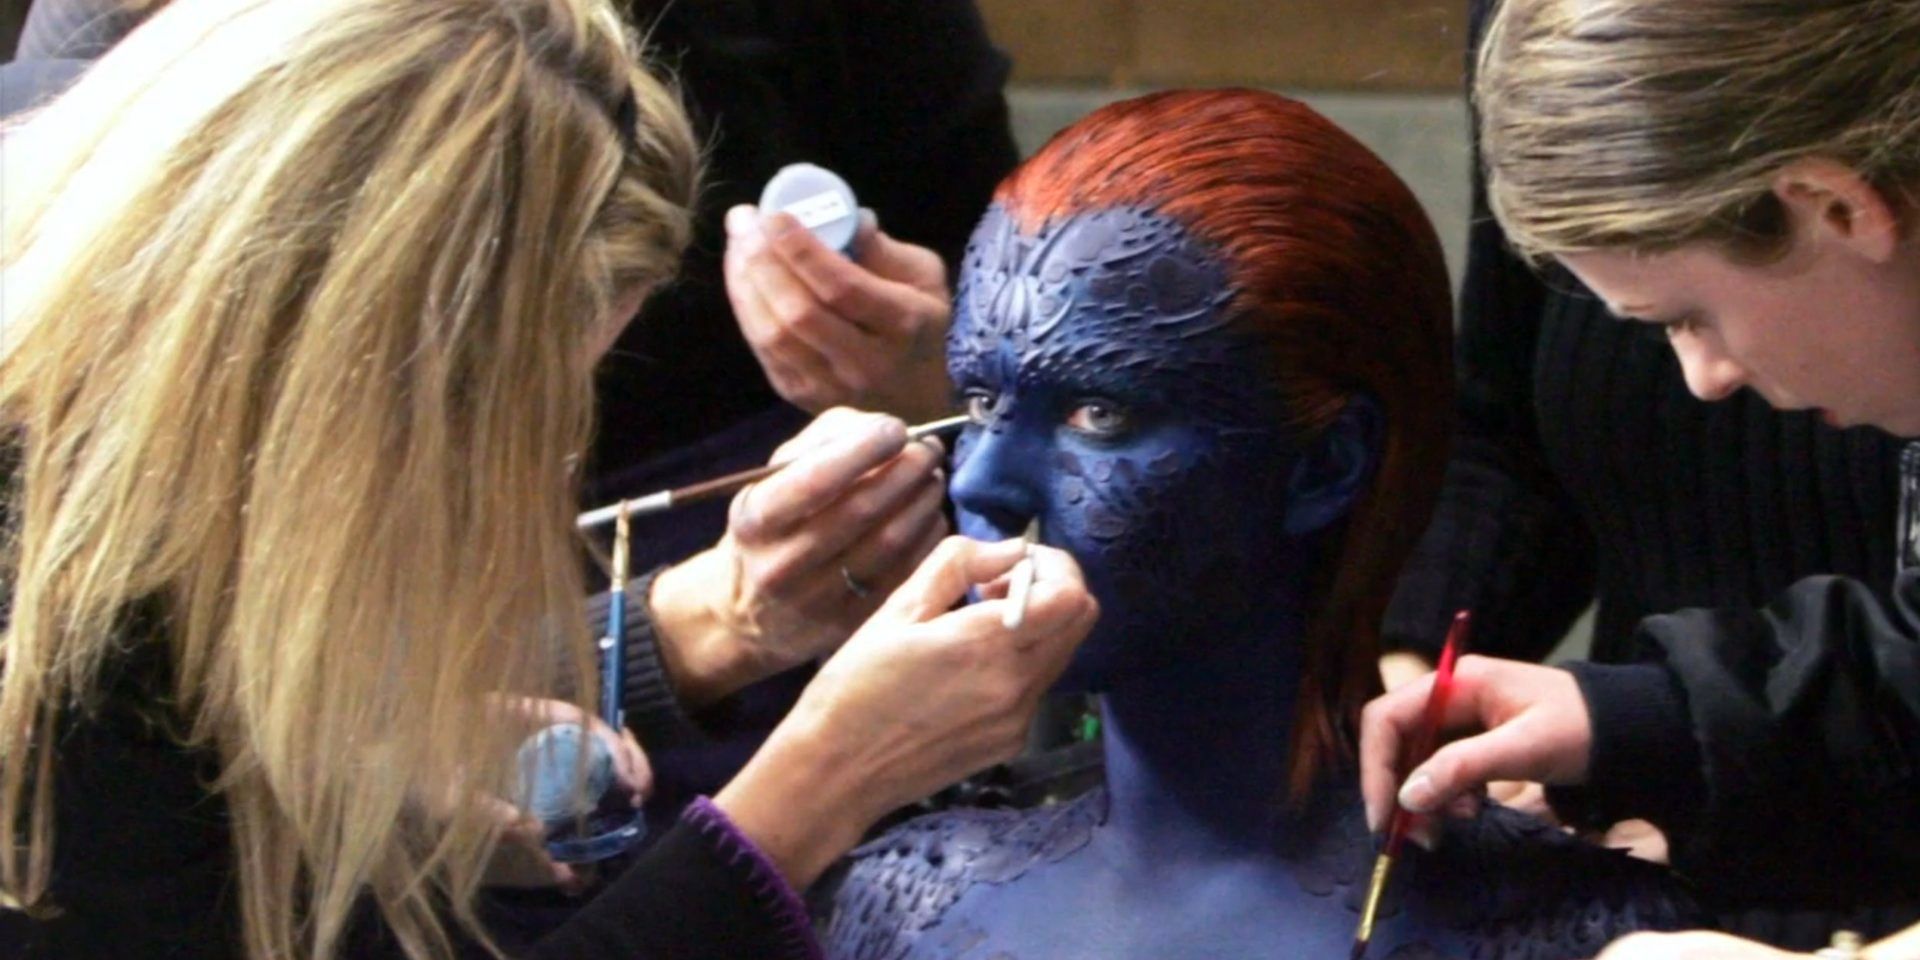 25 Crazy Facts Behind The Making Of The XMen Movies